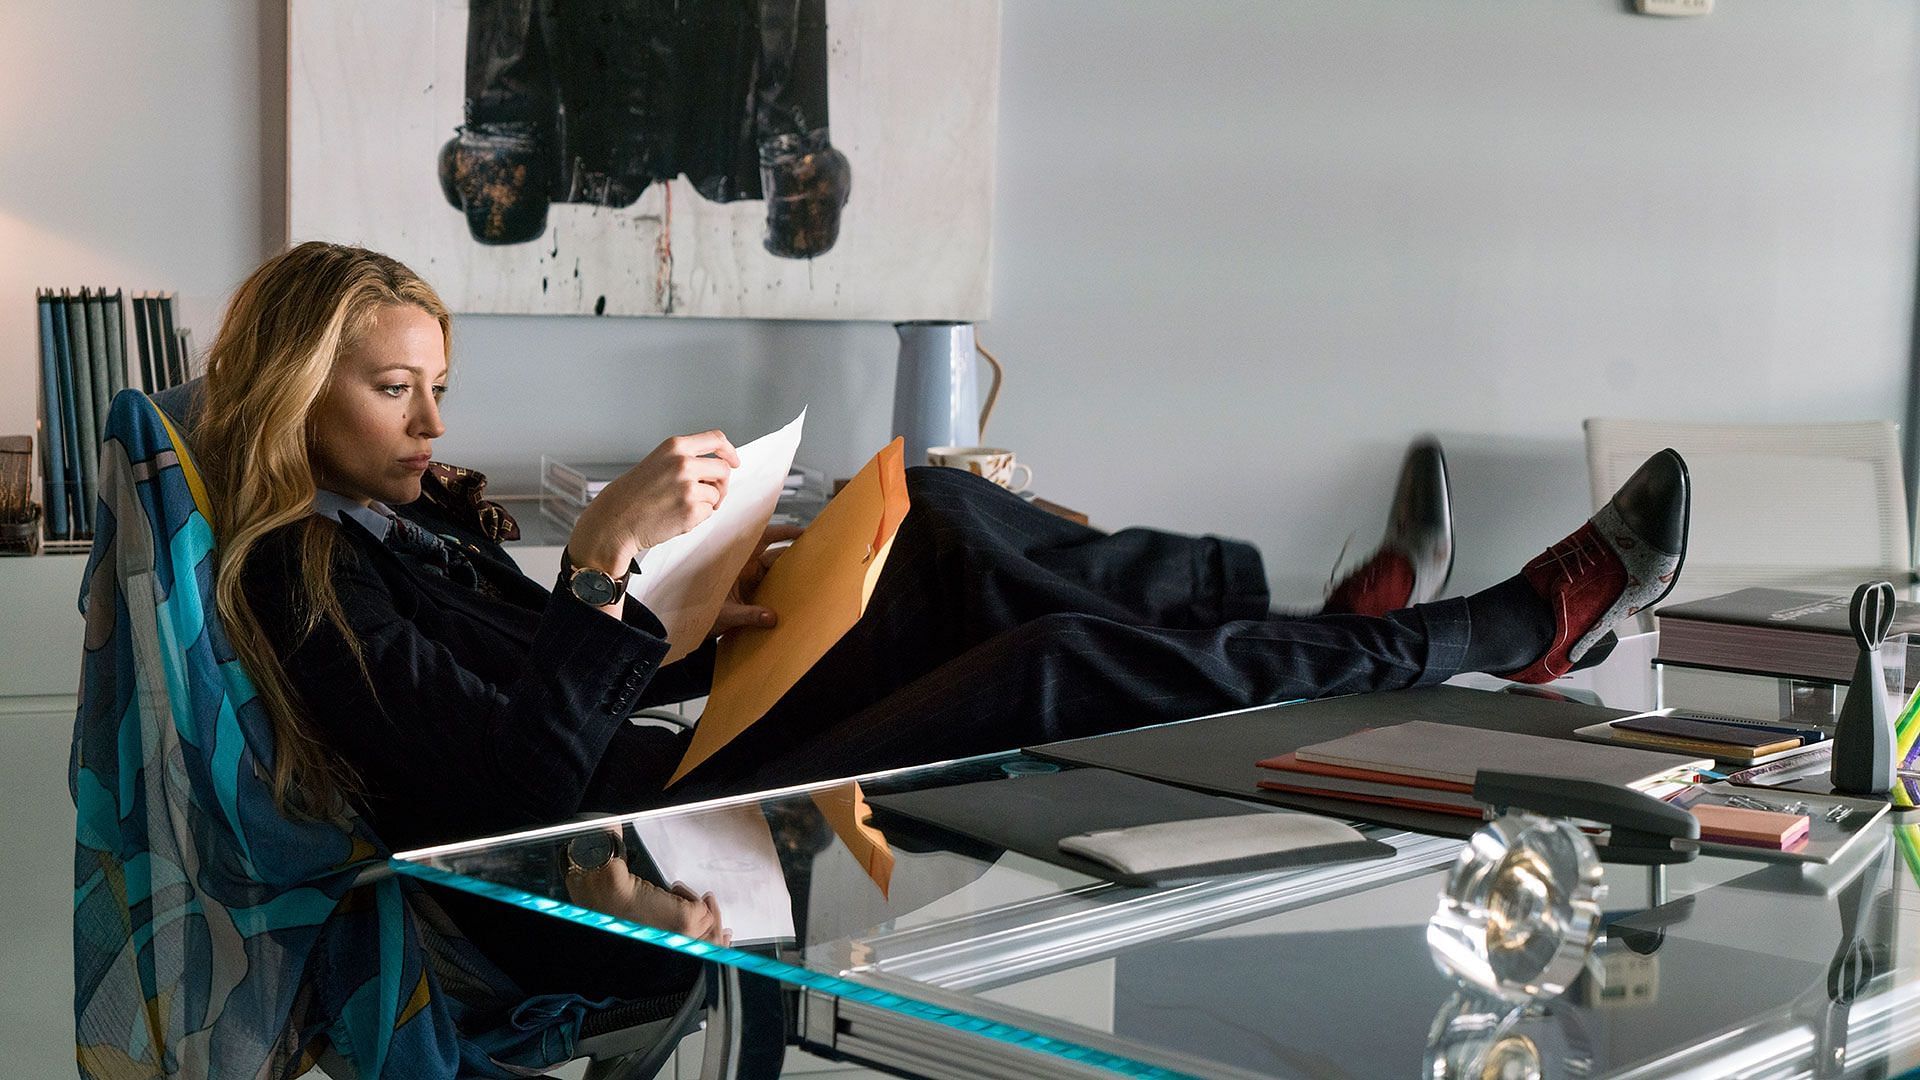 Blake Lively in &#039;A Simple Favor&#039; (Image via Lionsgate)